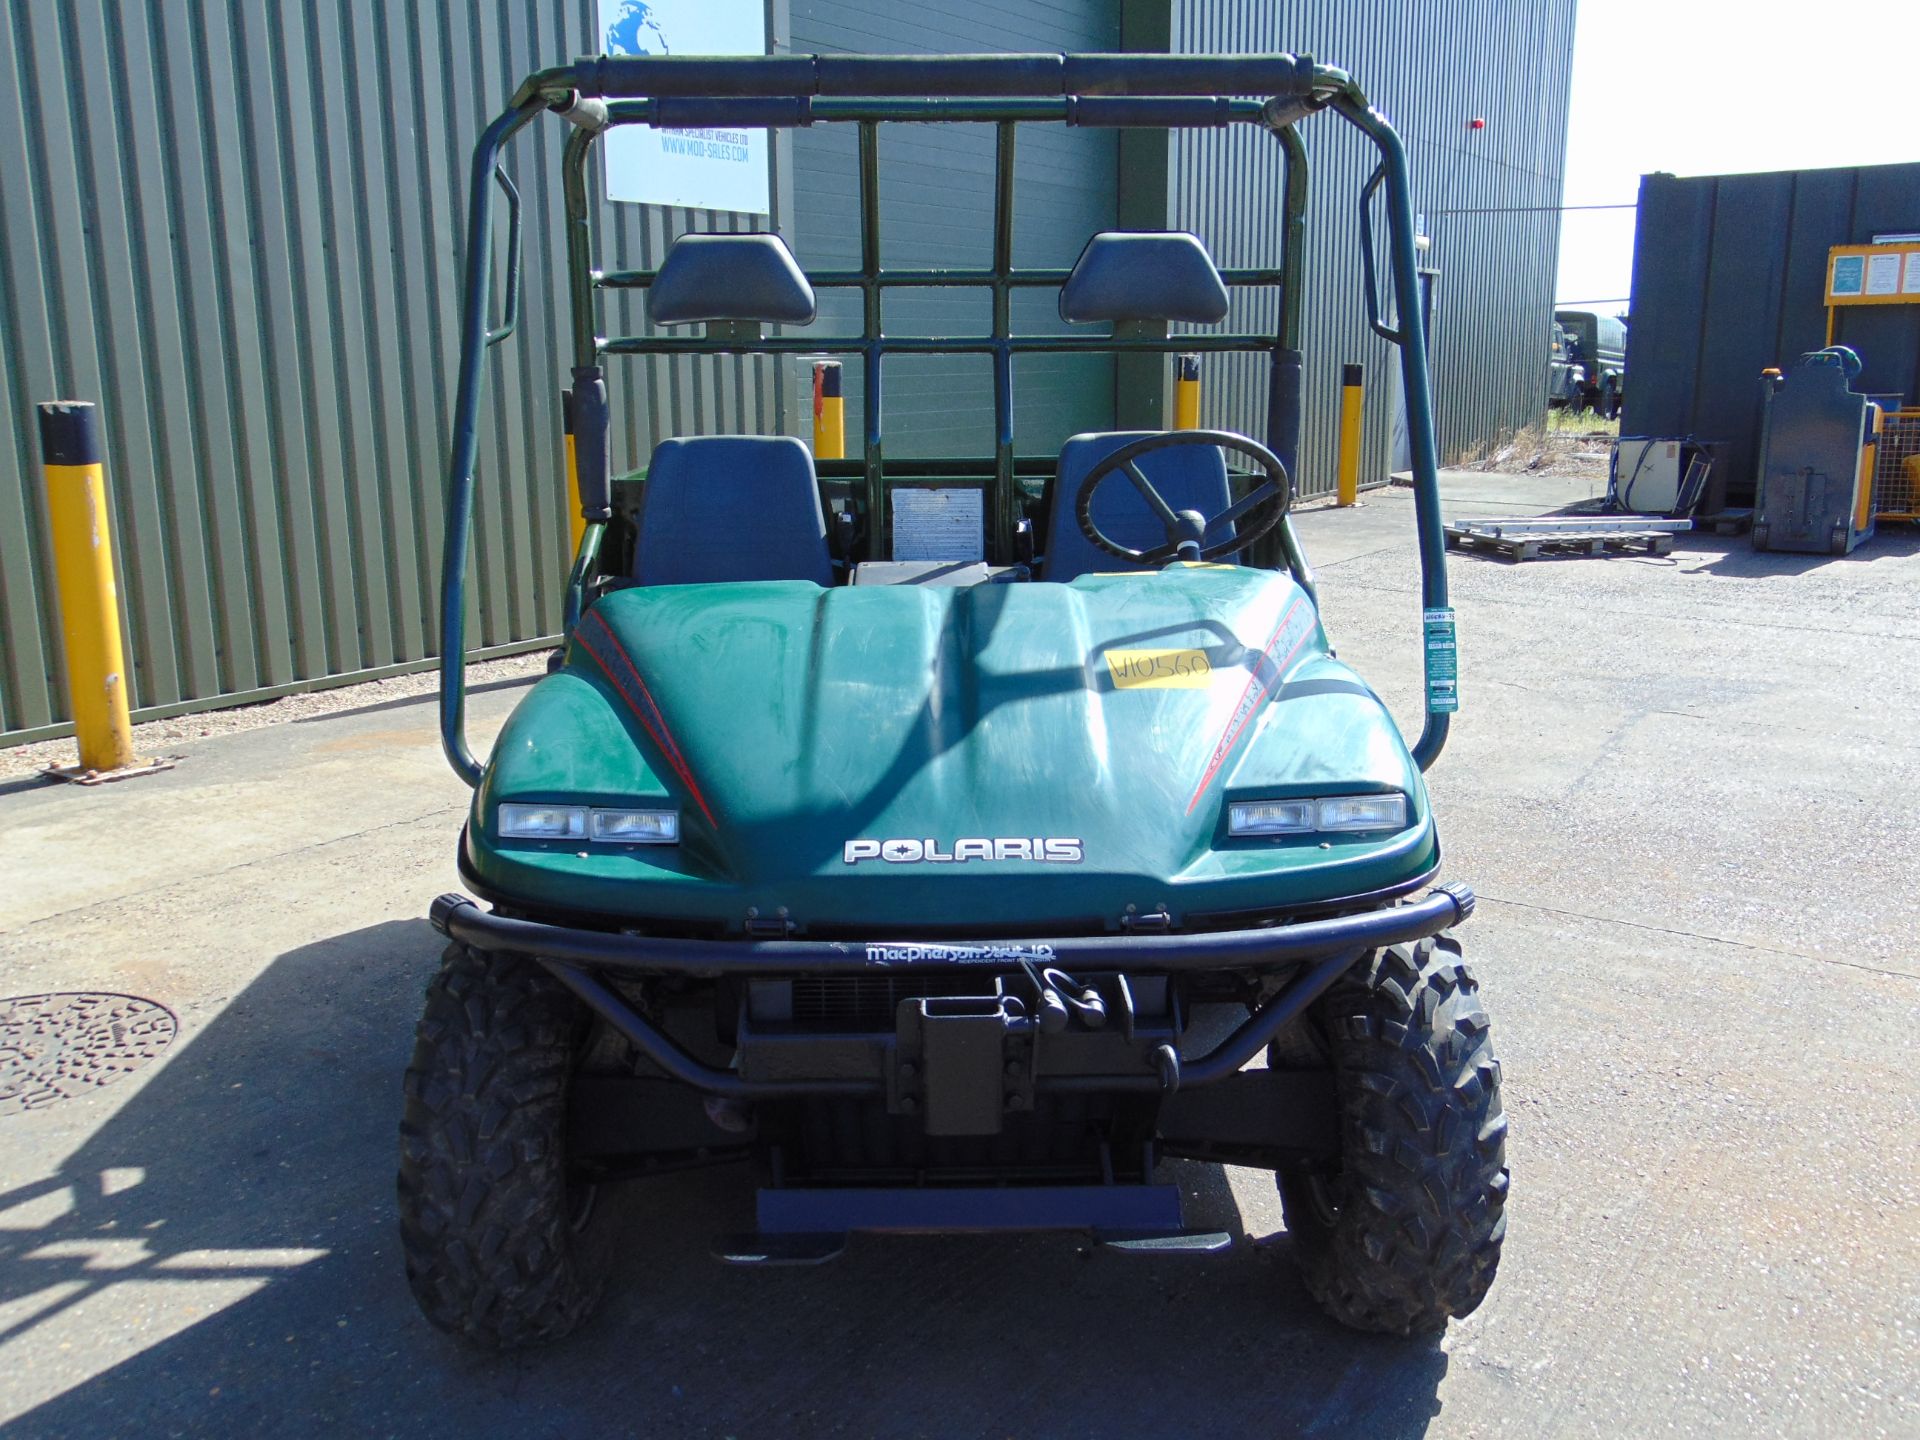 Polaris 6x6 Ranger Utility Vehicle Only 226 Hours! From National Grid. - Image 3 of 27